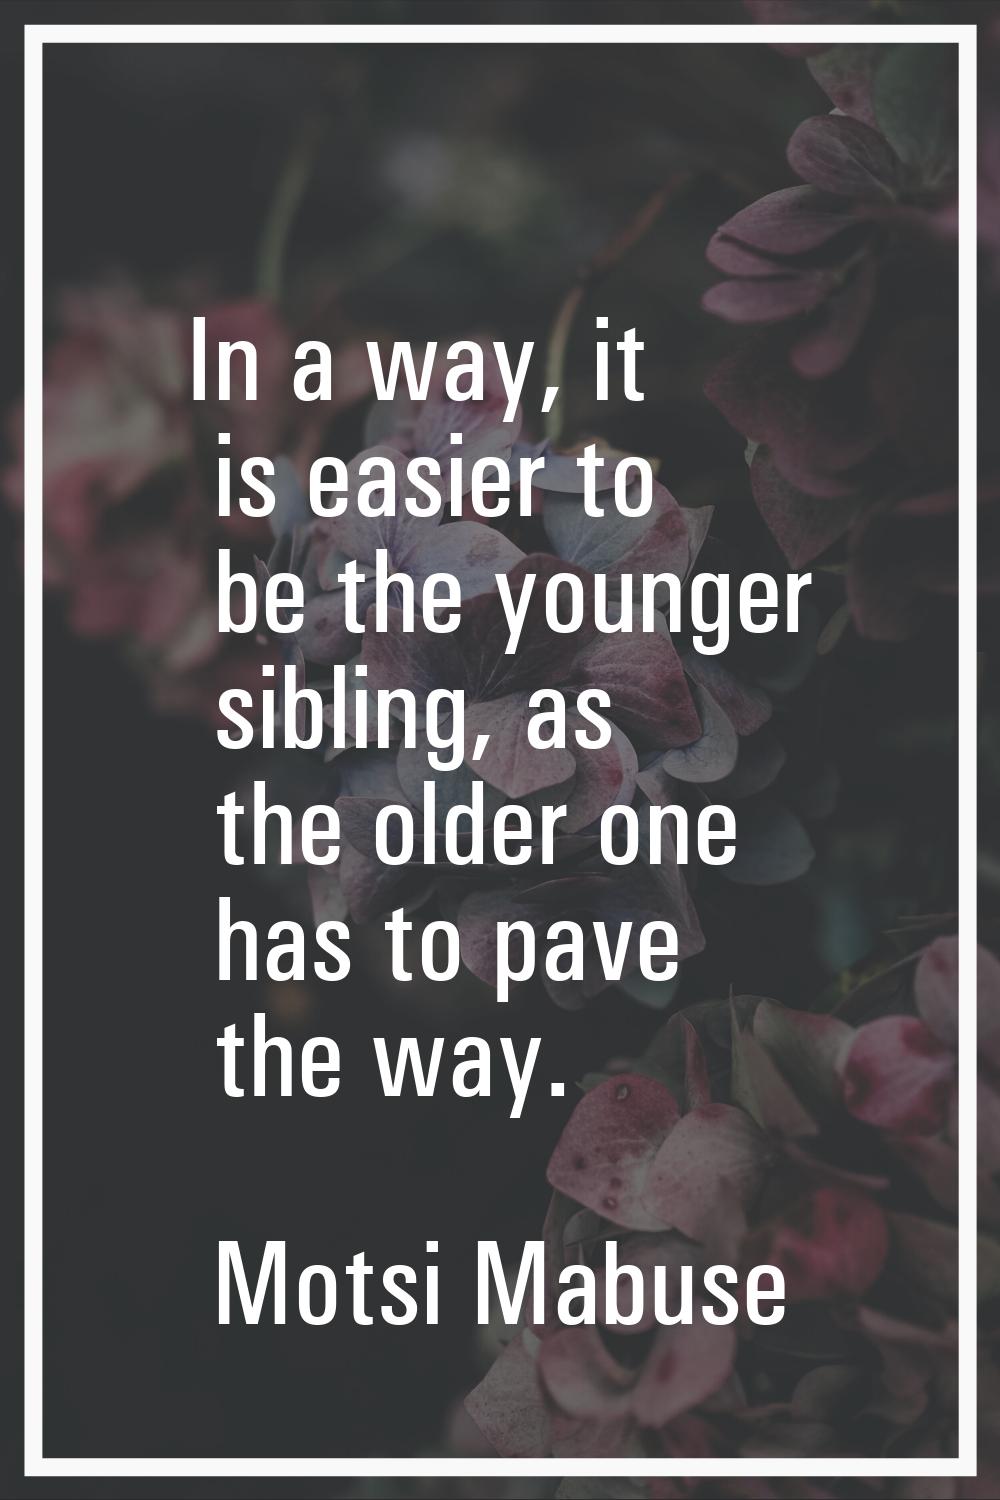 In a way, it is easier to be the younger sibling, as the older one has to pave the way.